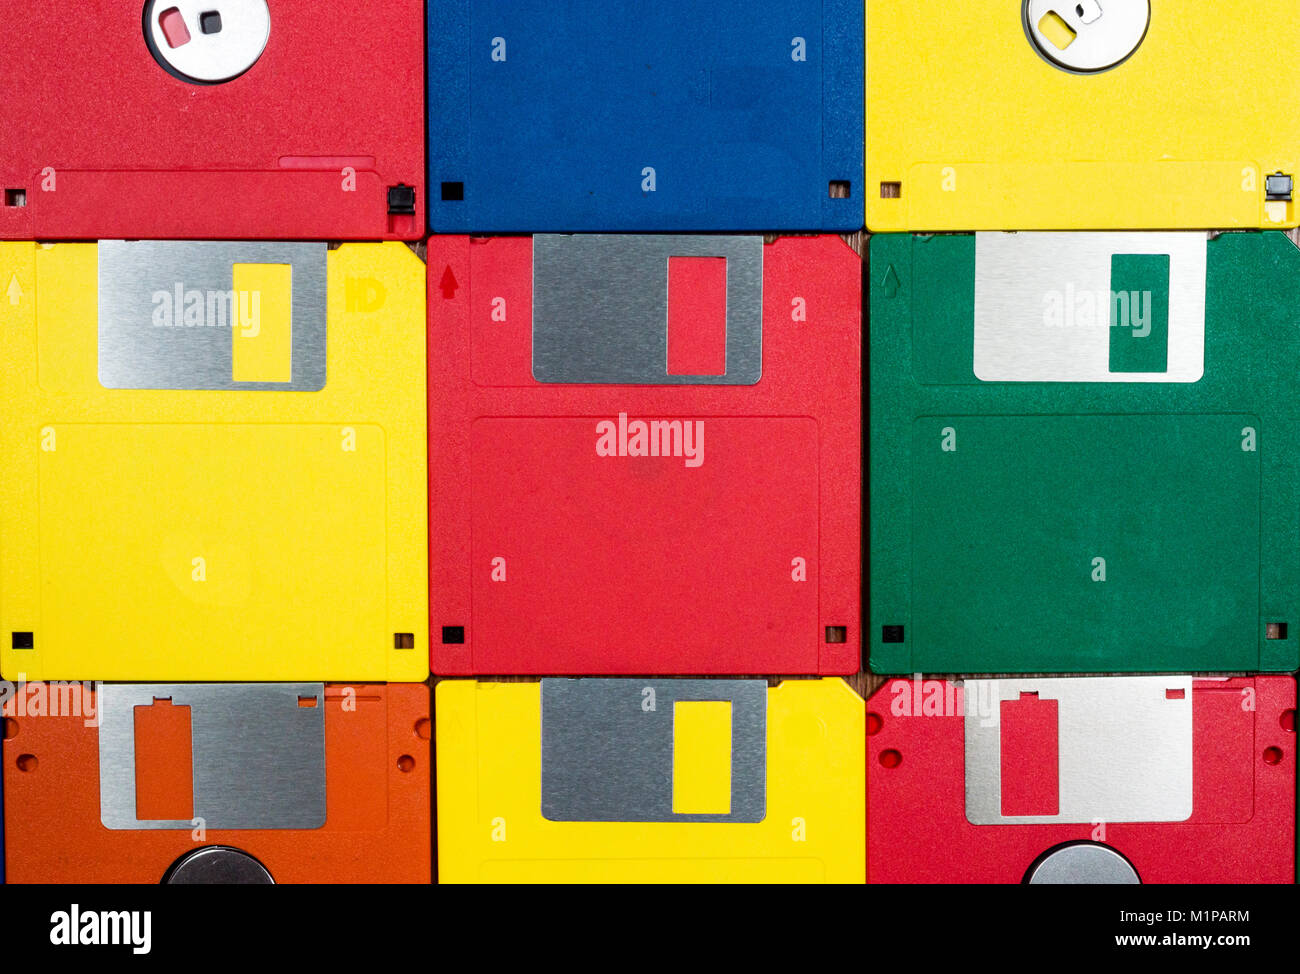 Horizontal close-up shot of nine multicolored plastic diskettes.  Shows fronts and backs of disks. Stock Photo